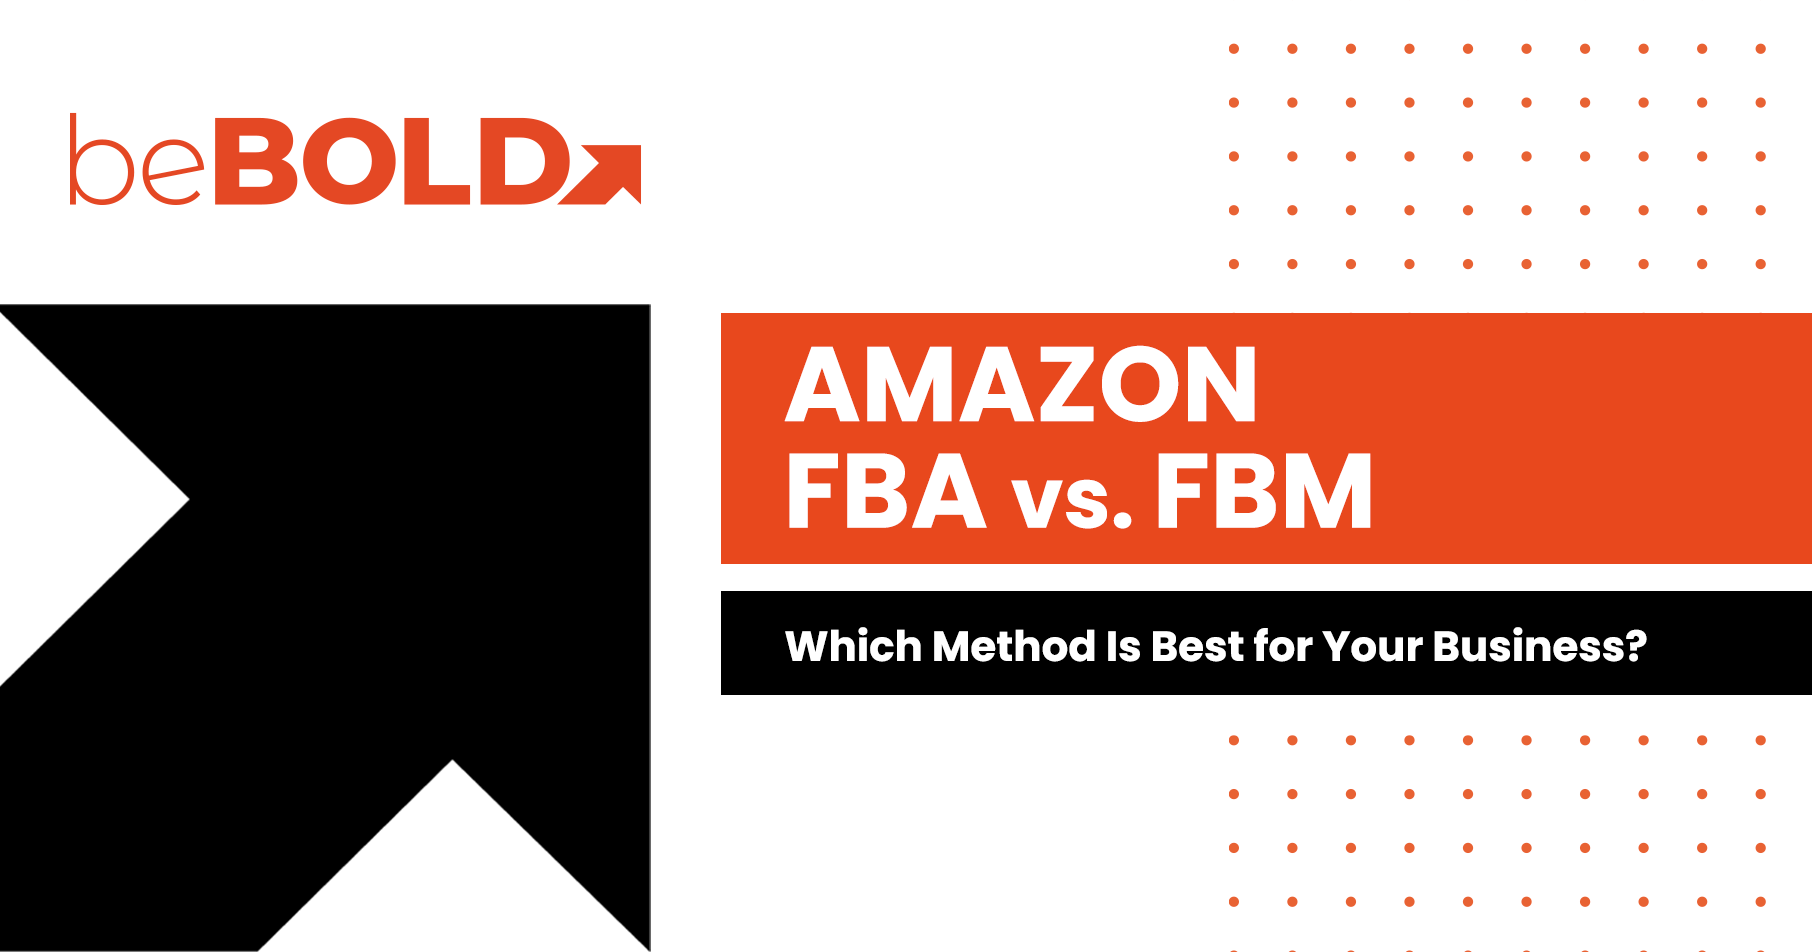 Amazon FBA vs. FBM: Which Method Is Best for Your Business?